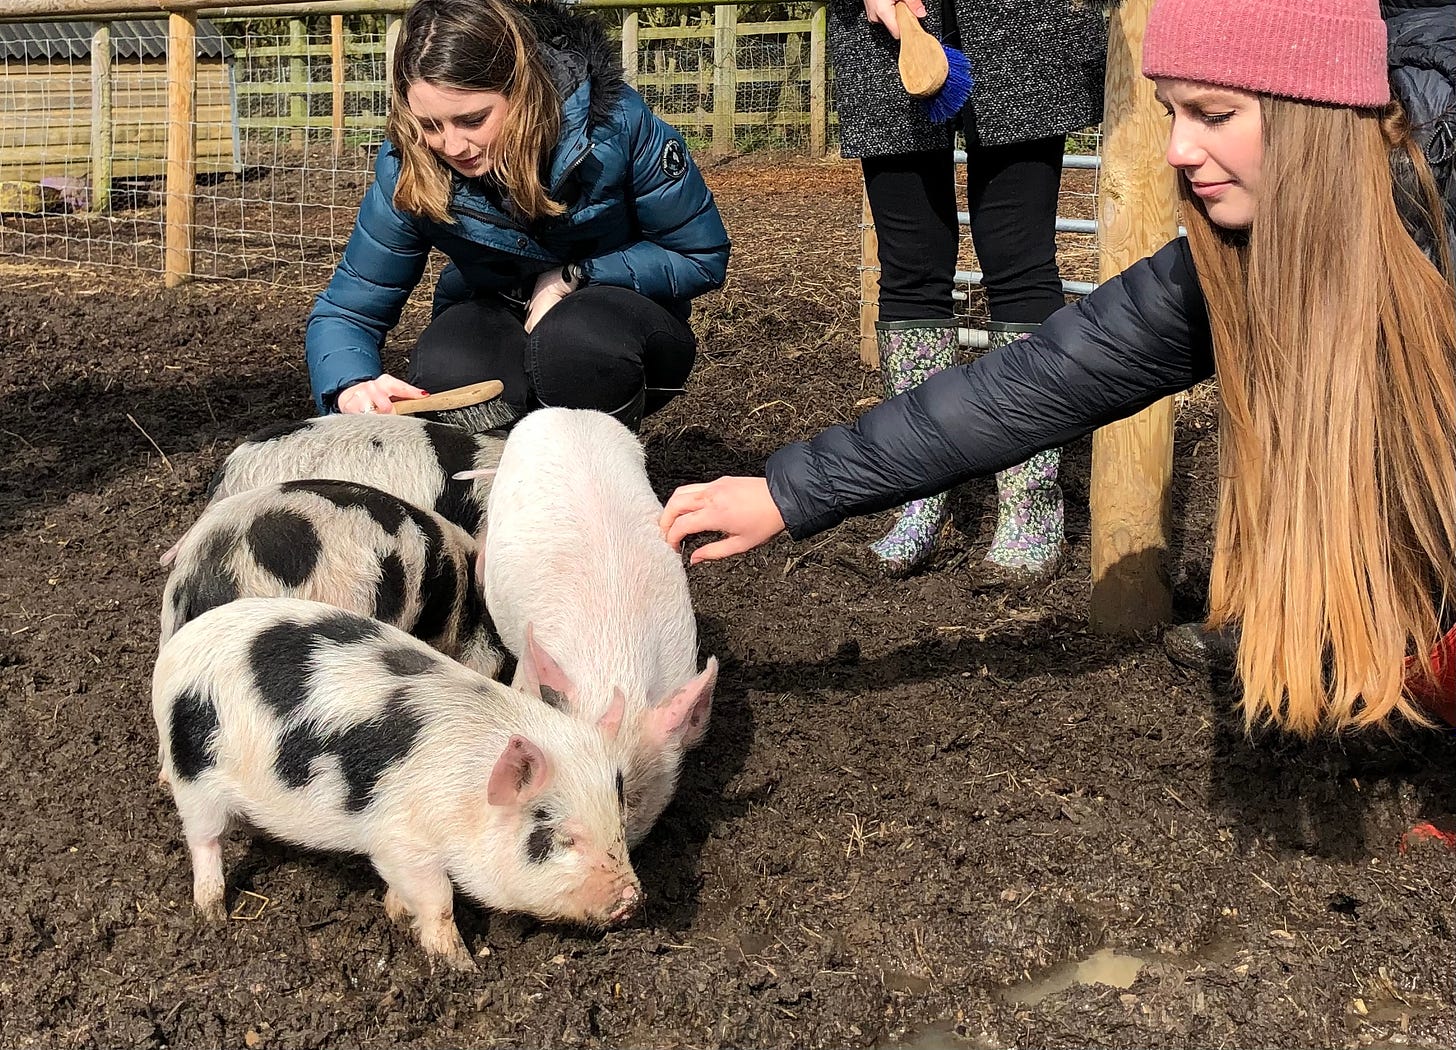 Two visitors scratch and tickle the pigs